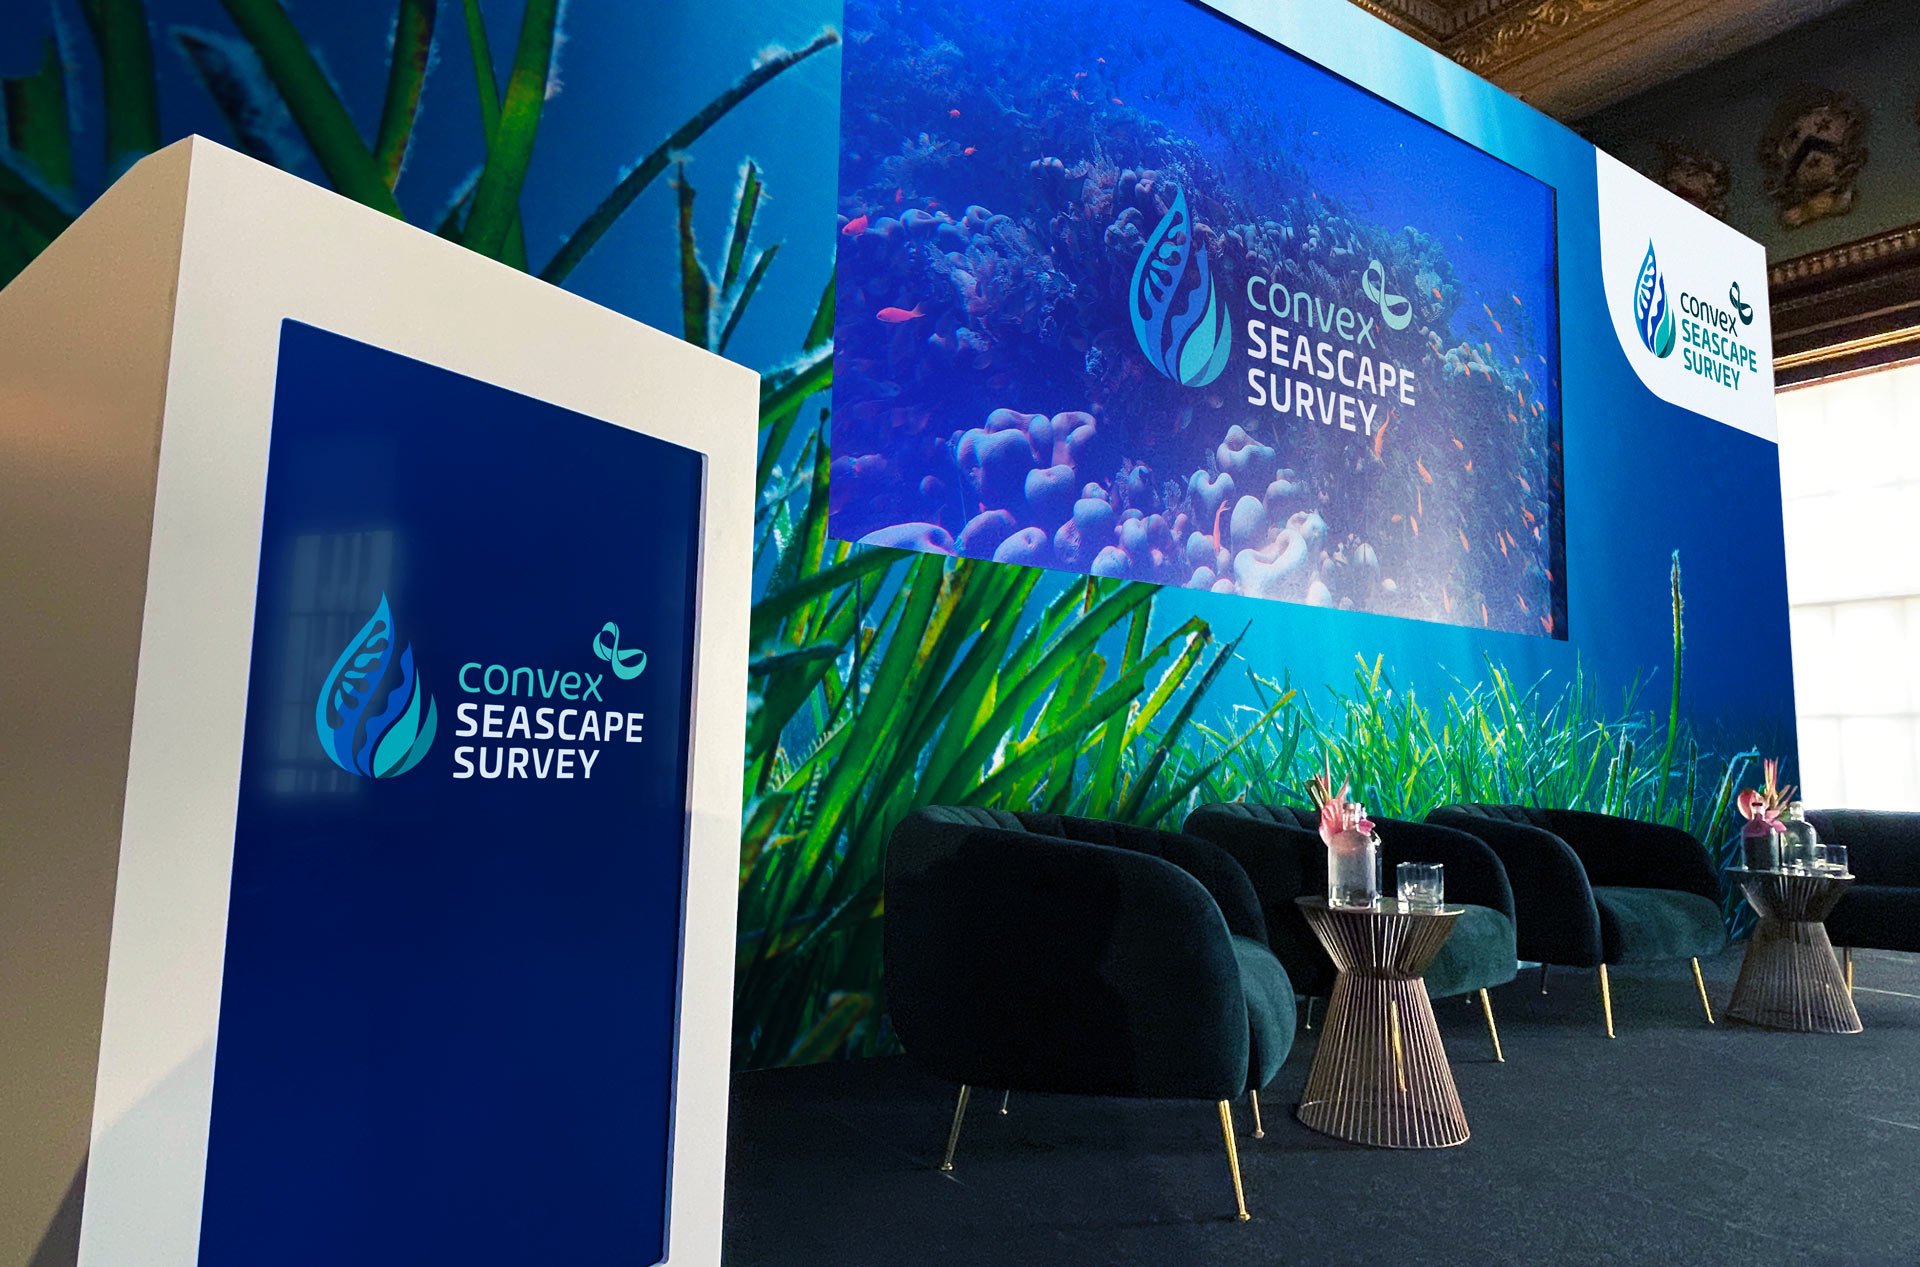 Branded stage graphics for the Convex Seascape Survey event